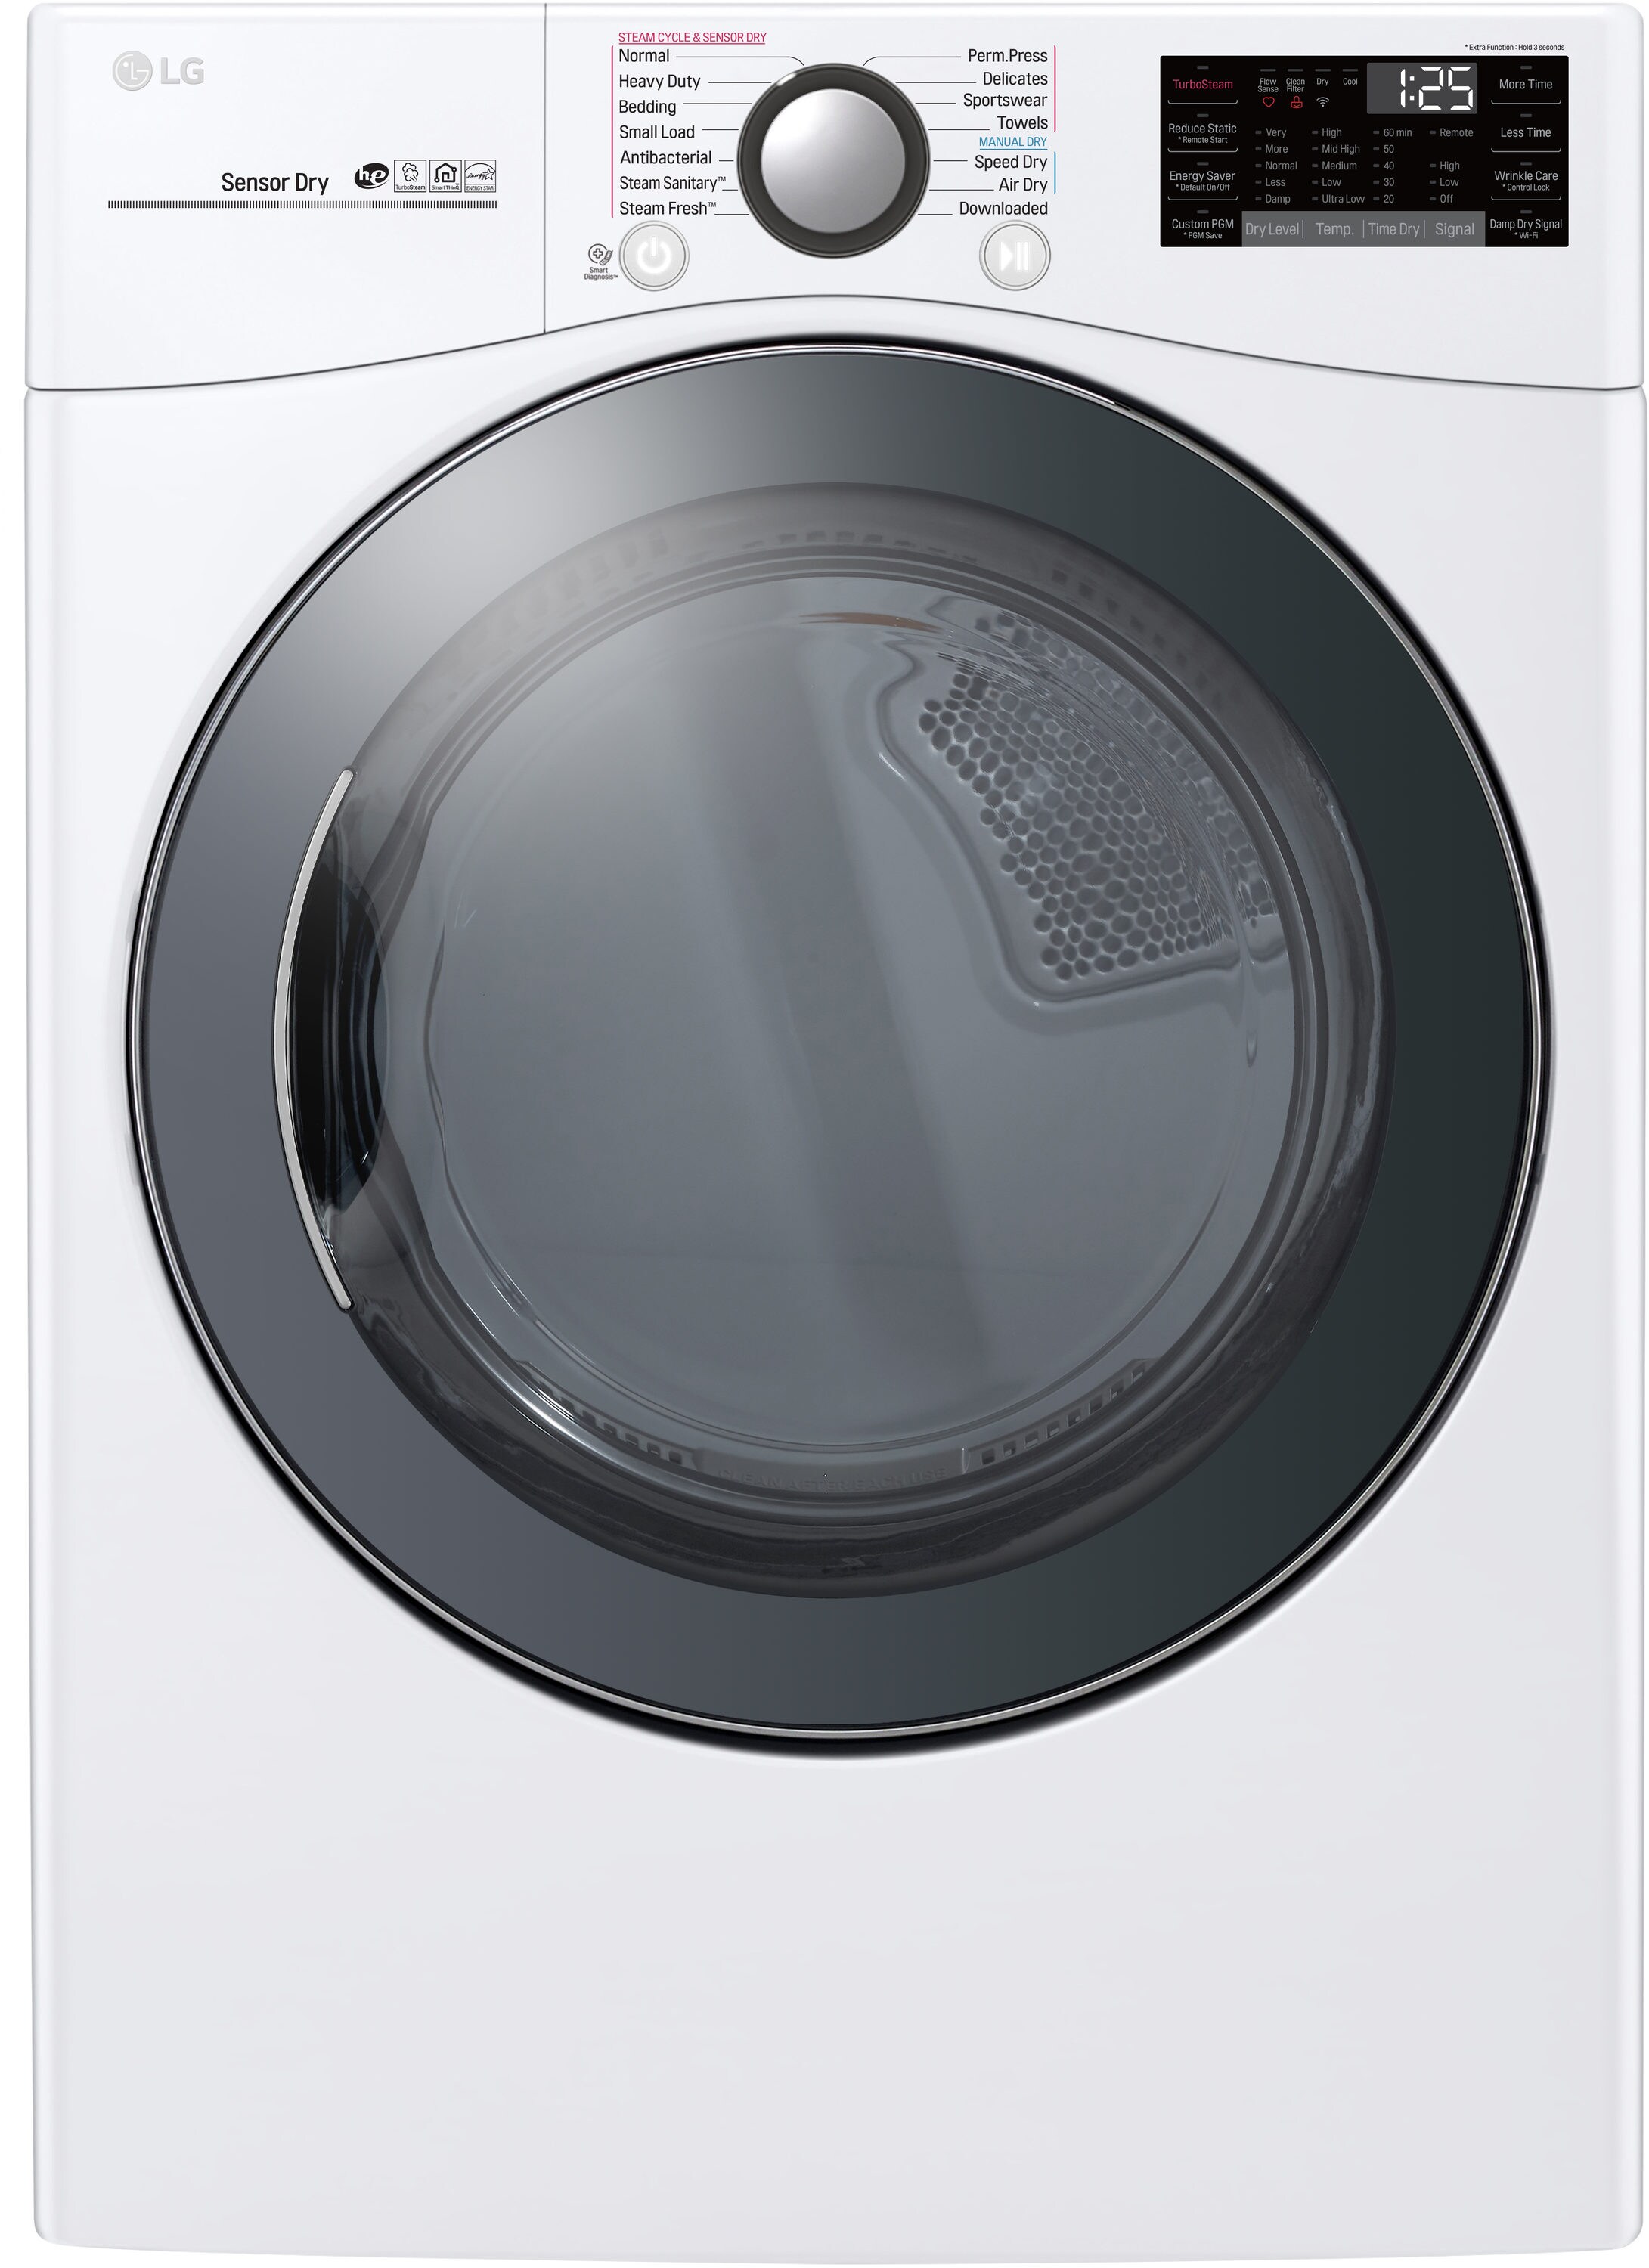 LG TurboSteam Smart Wi-Fi Enabled 7.4-cu ft Stackable Steam Electric Dryer (White) ENERGY STAR at Lowes.com